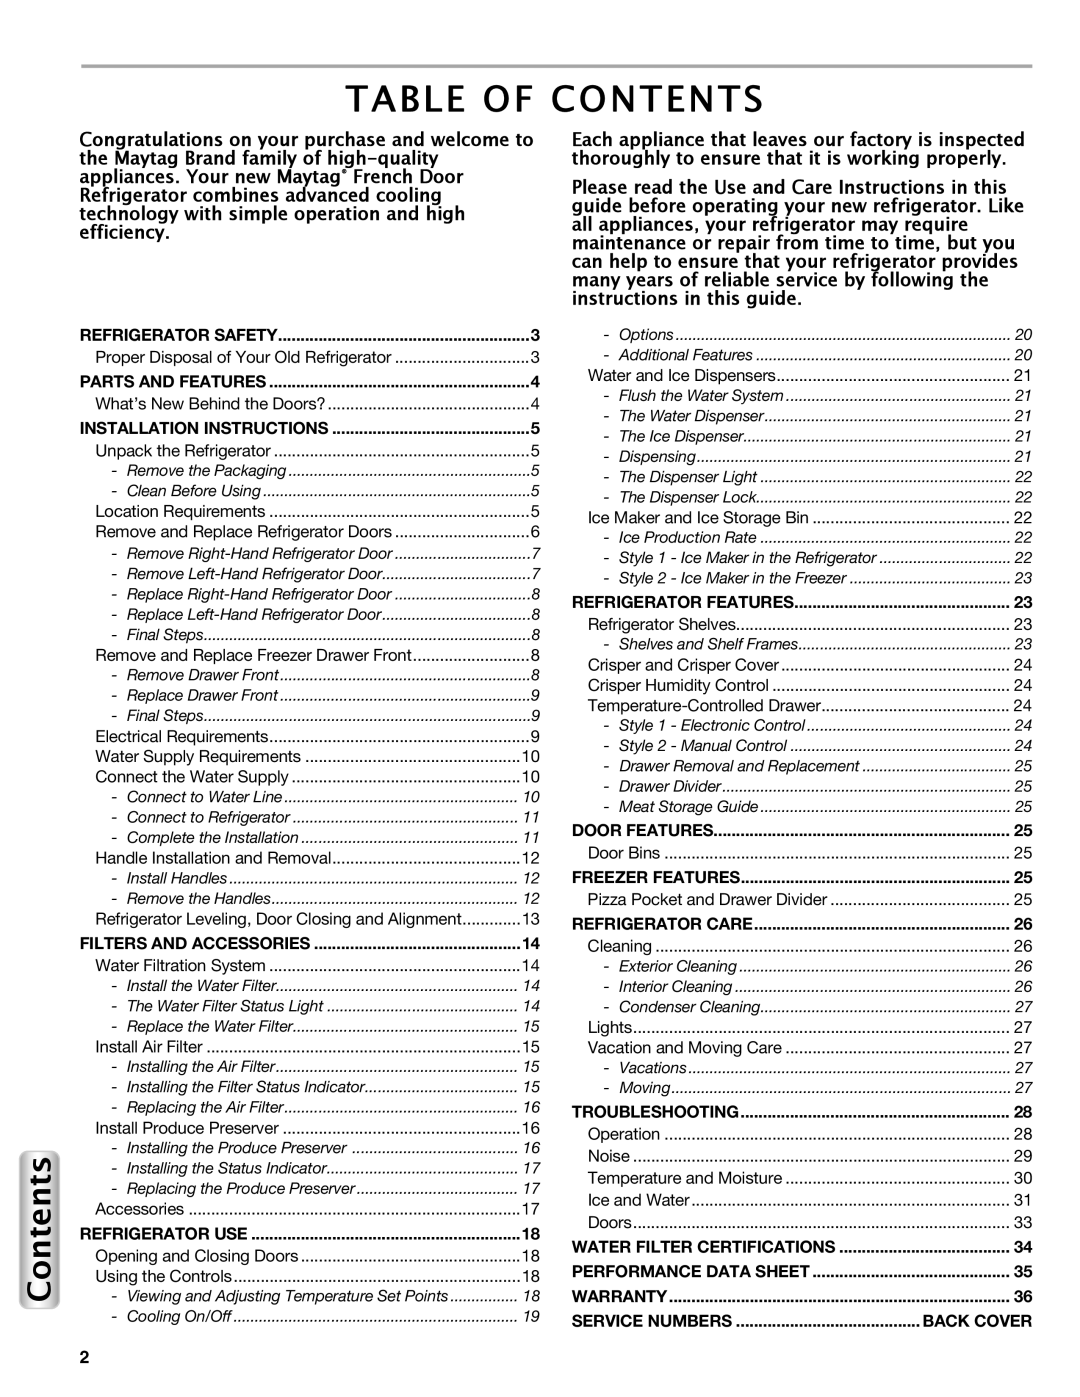 Maytag W10558104A Table Of Contents, Refrigerator Safety, Parts And Features, Installation Instructions, Refrigerator Use 